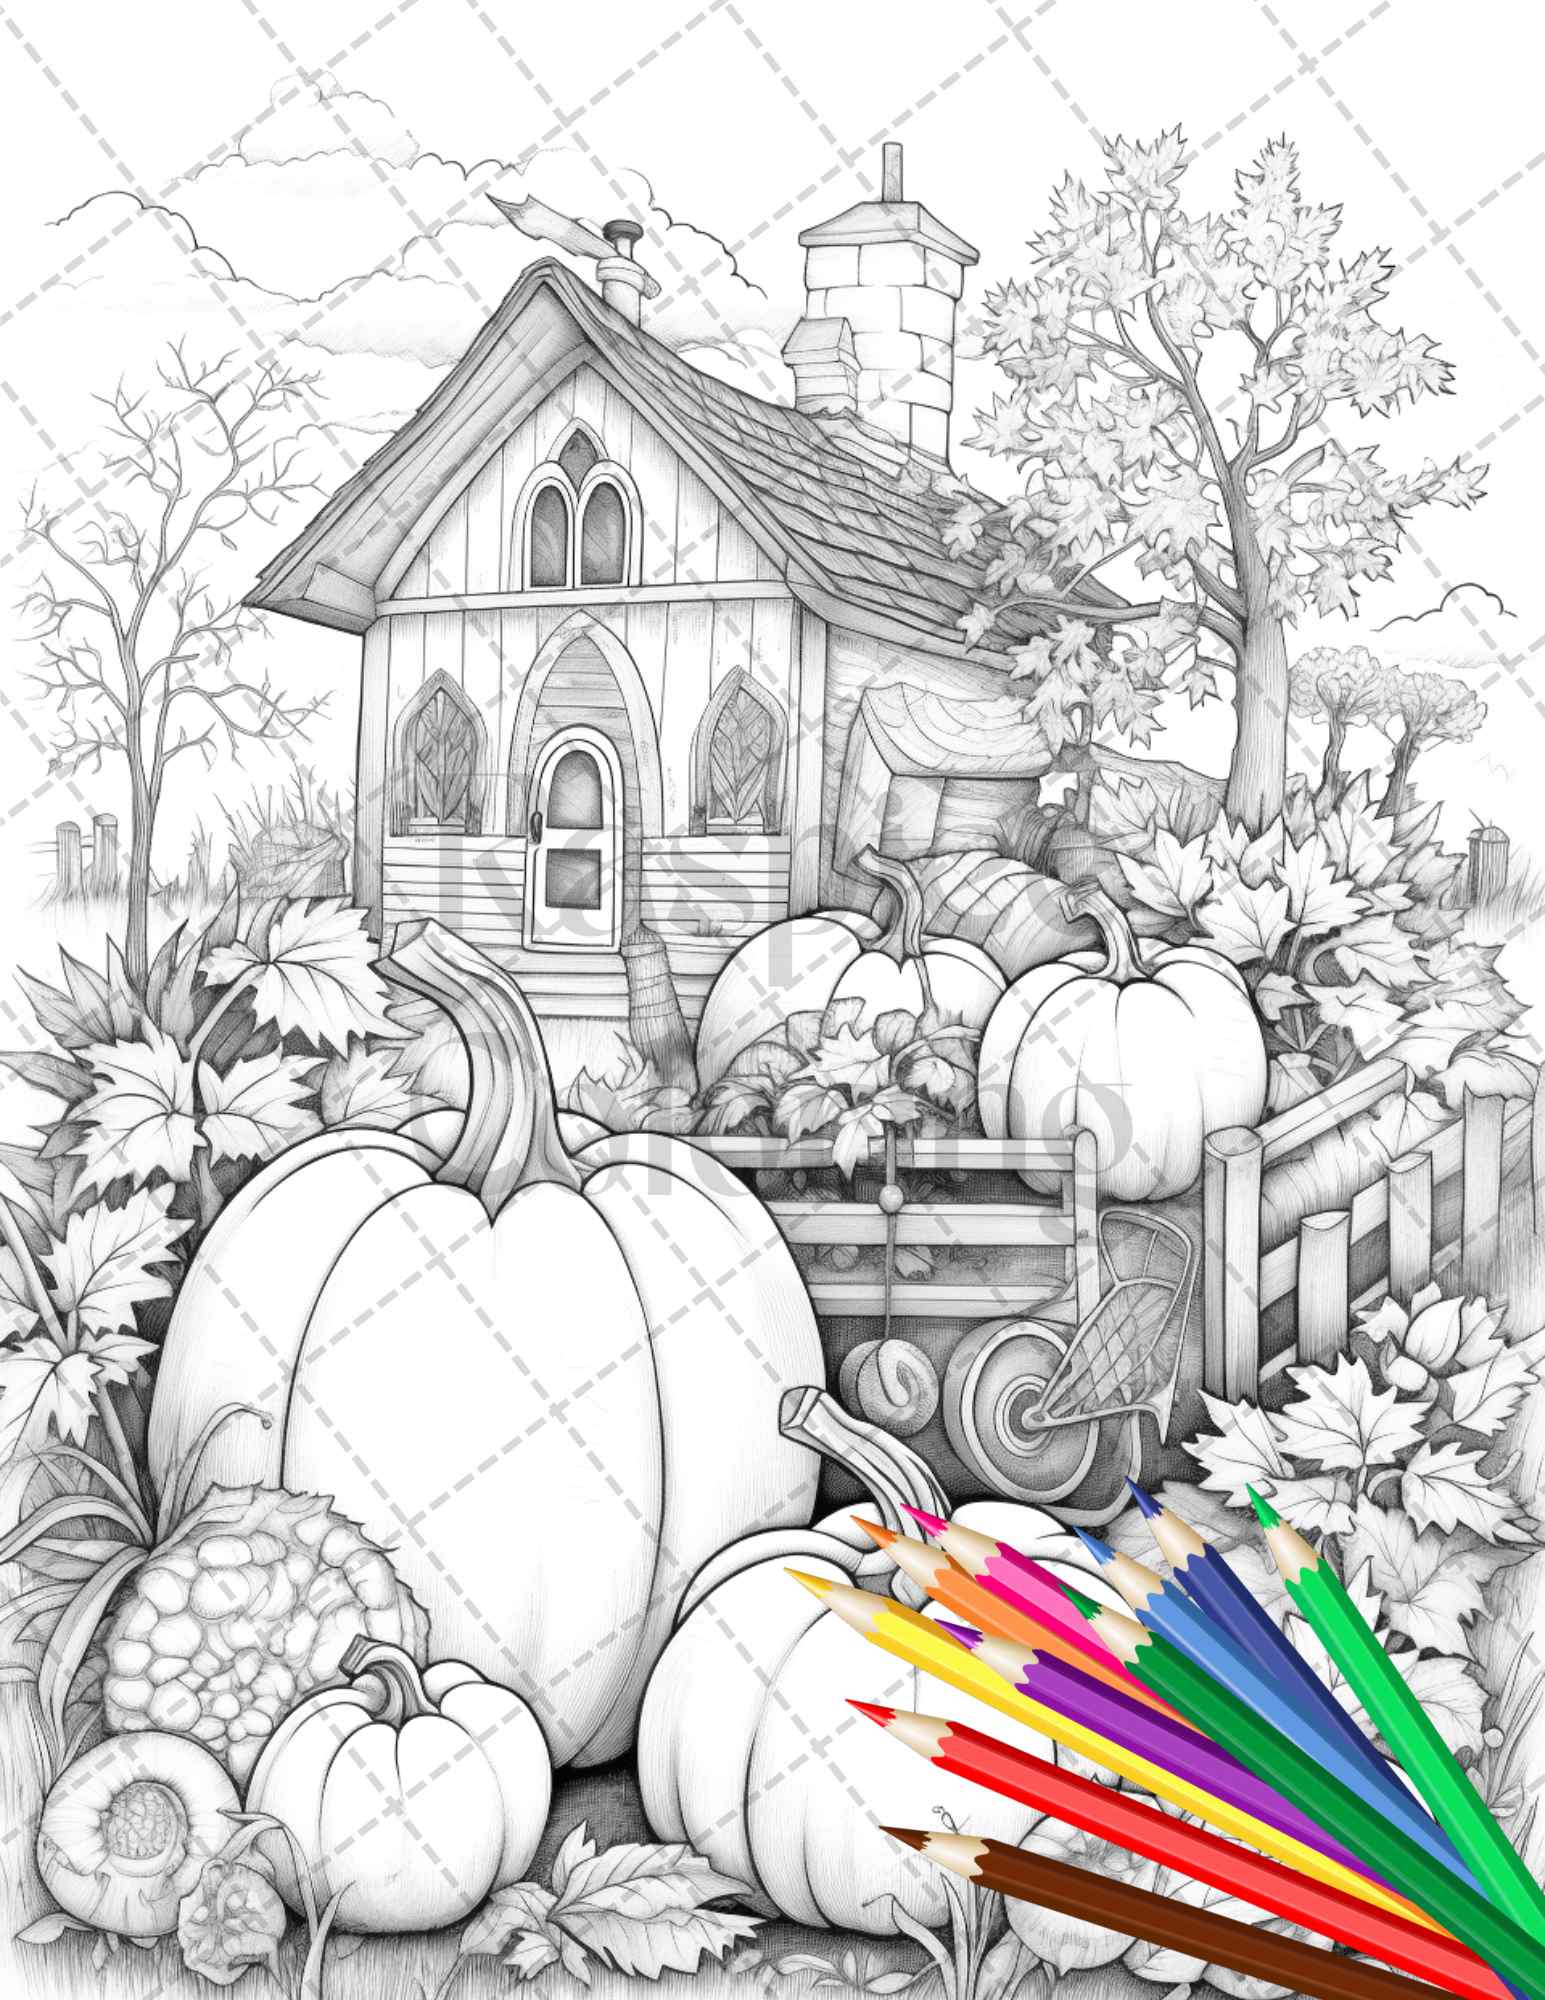 Pumpkin garden scenery grayscale coloring pages printable for adults â coloring